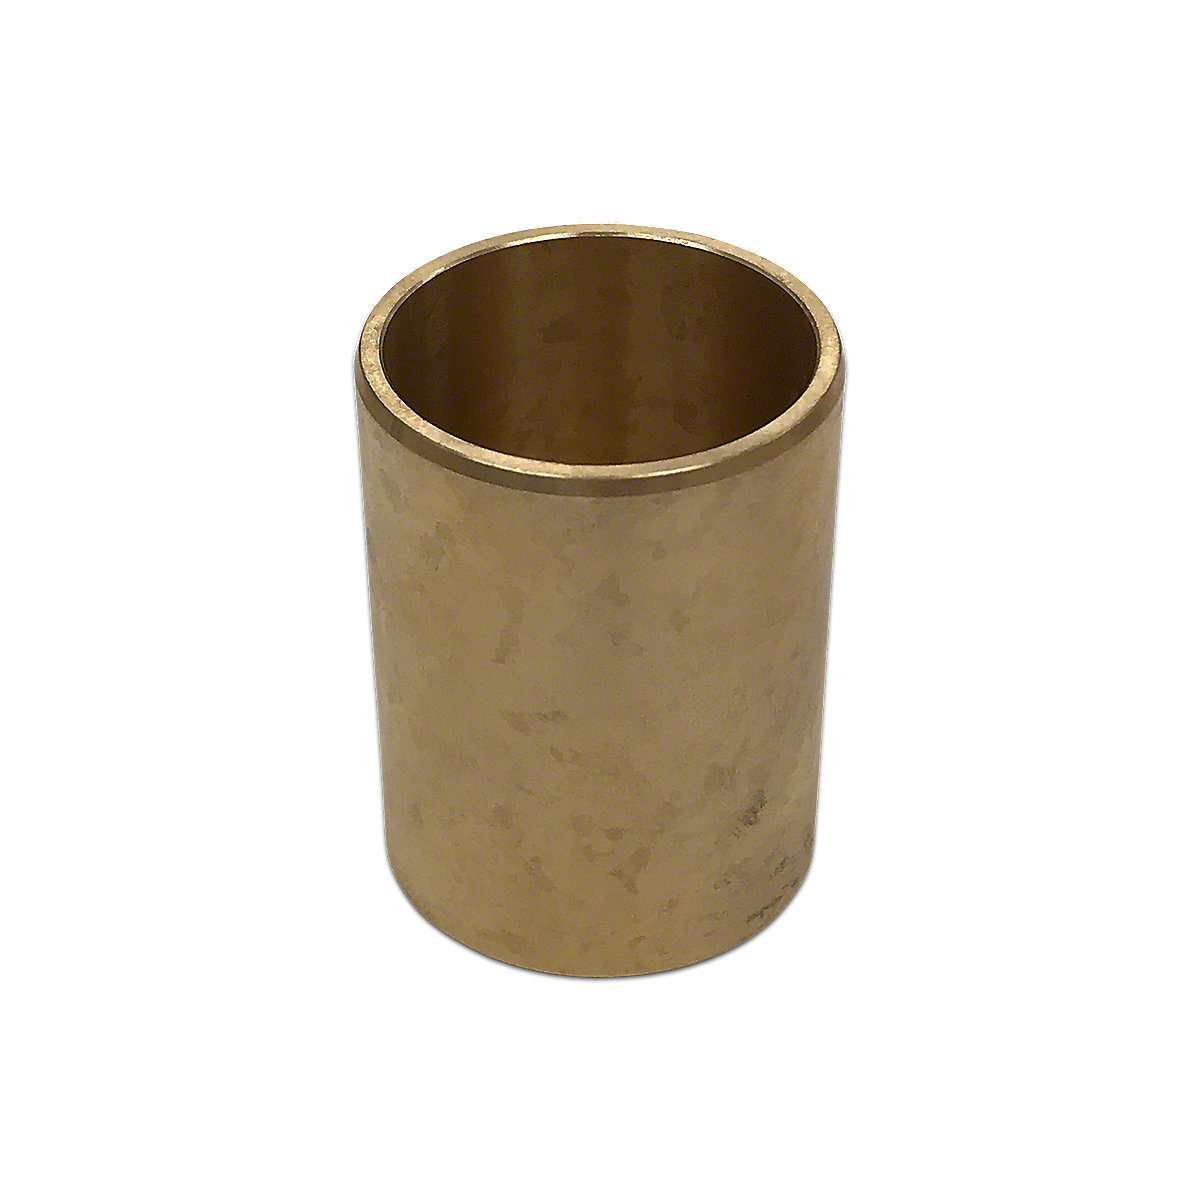 Wide Front Axle Spindle Bushing